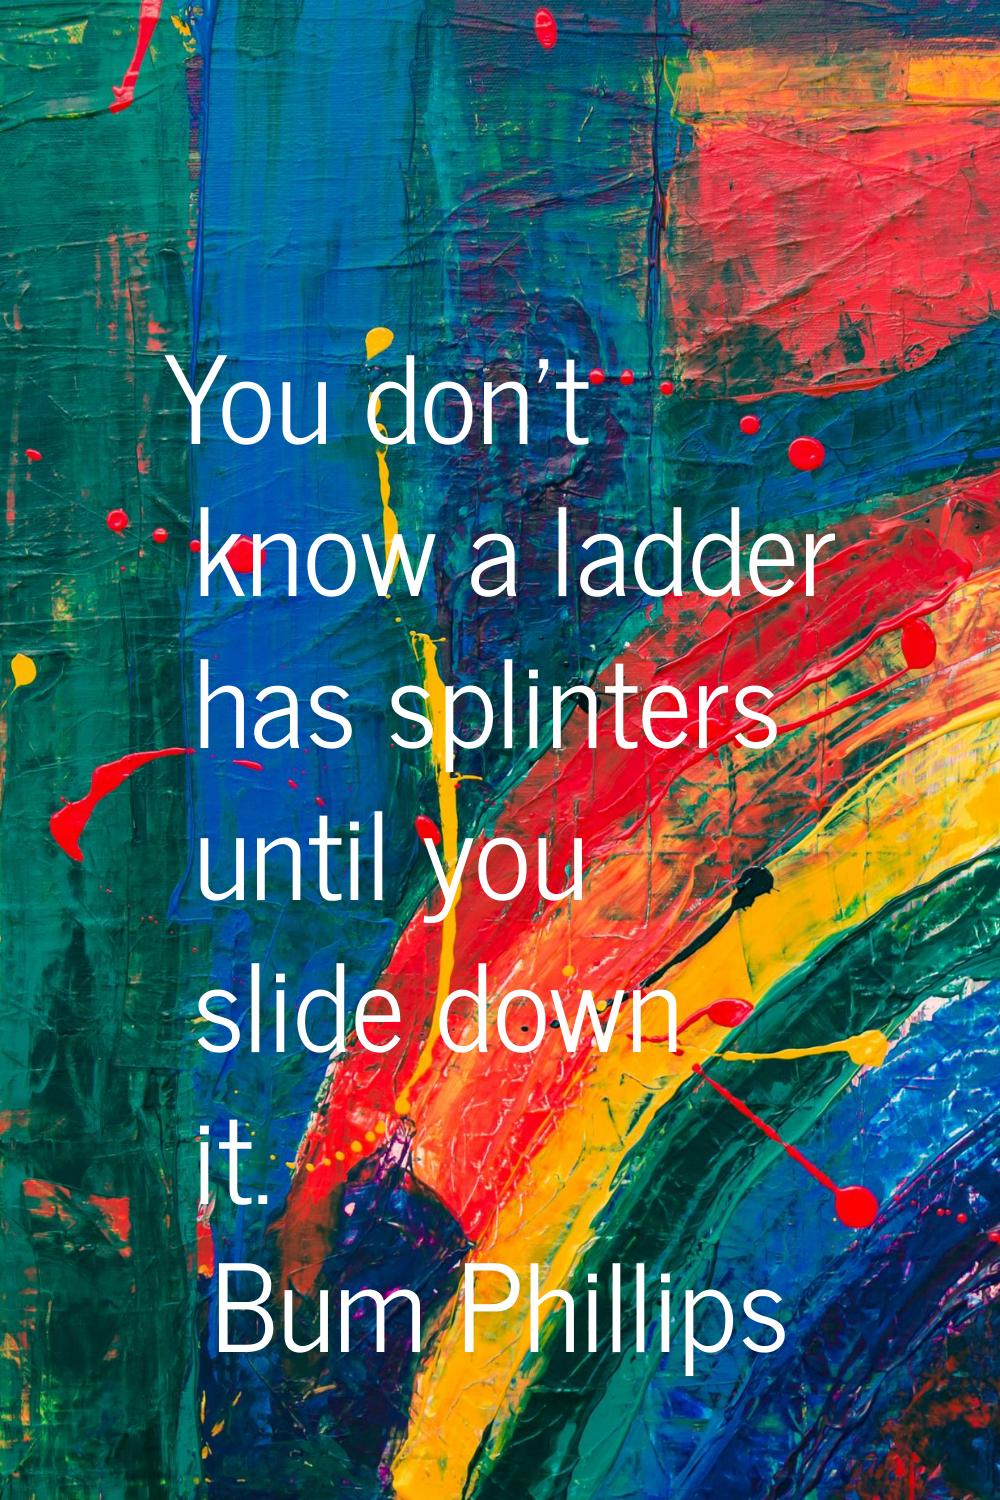 You don't know a ladder has splinters until you slide down it.